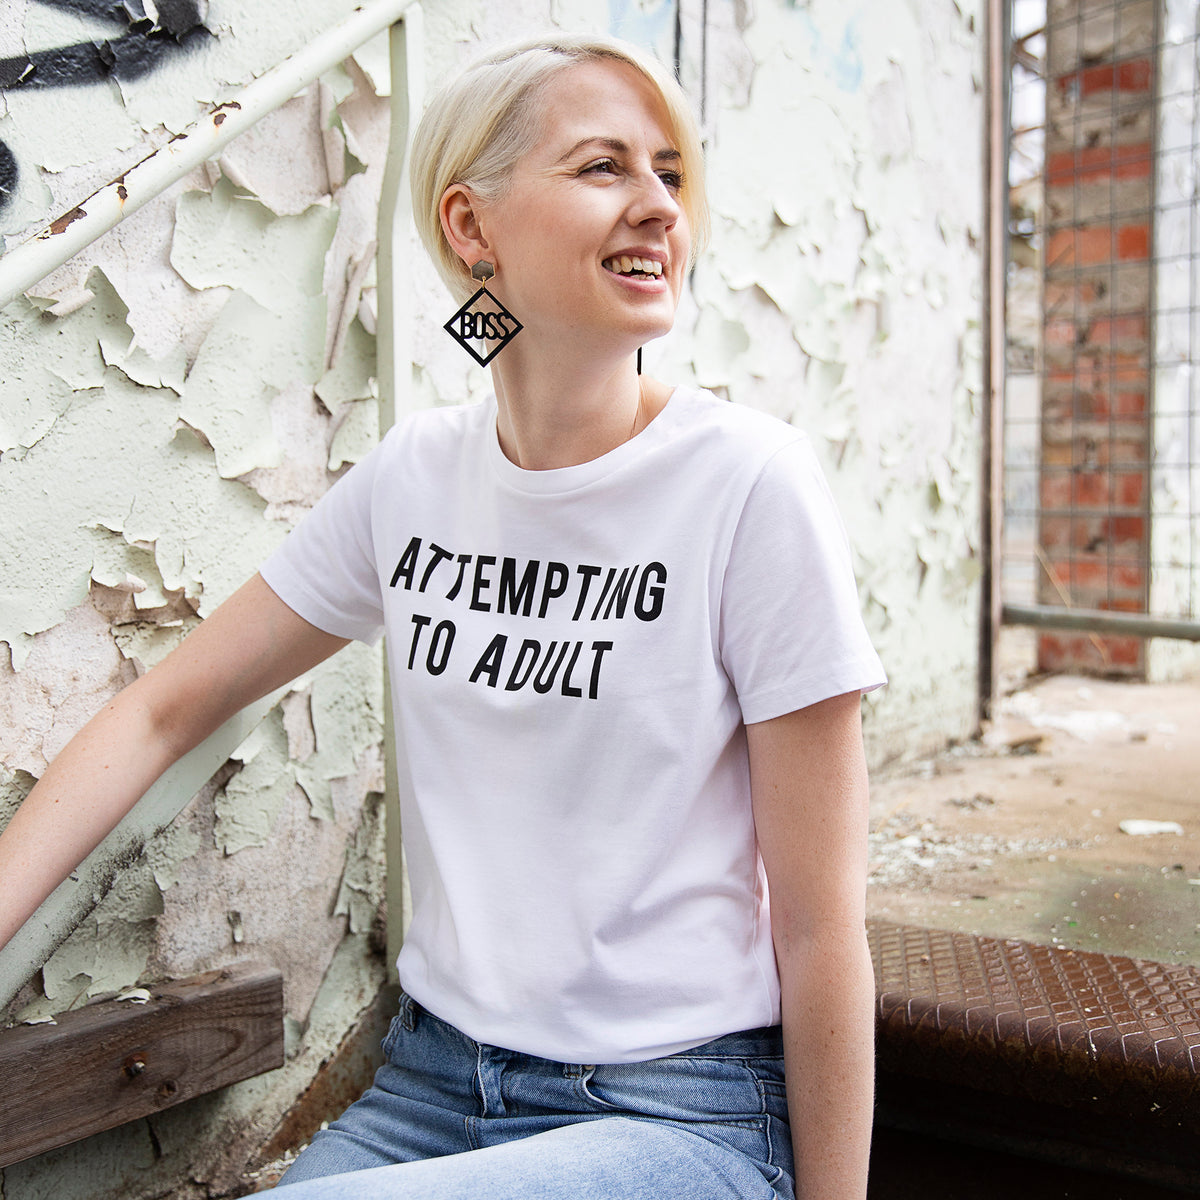 Woman with blonde hair wearing Slightly Shirtee Attempting to Adult Slogan Tshirt